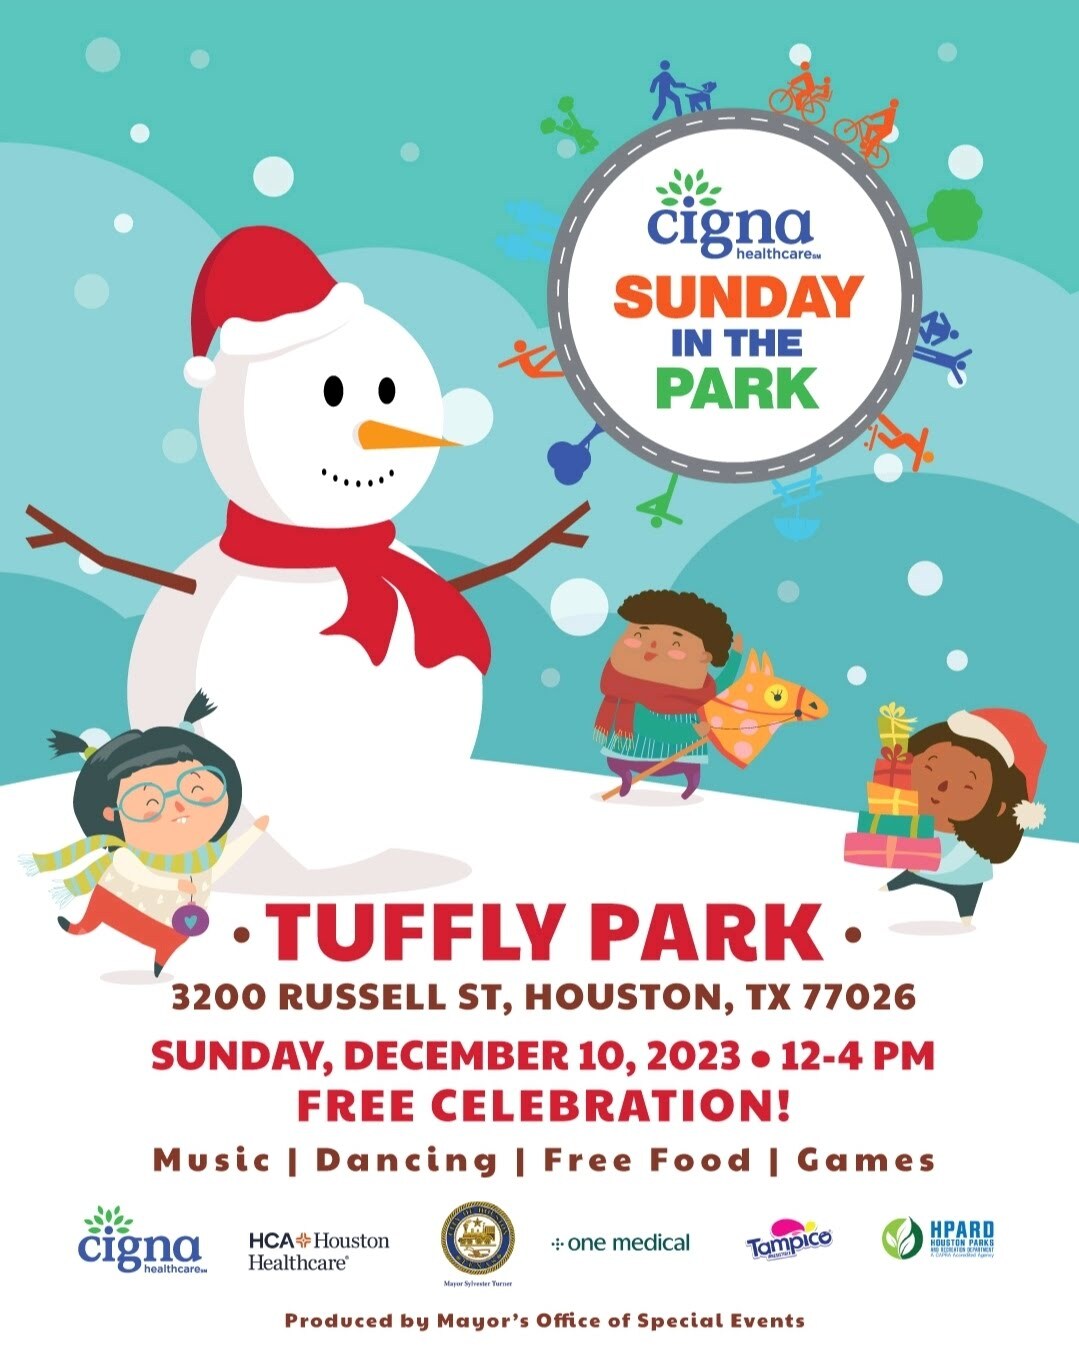 Cigna Sunday in the Park this Sunday, December 10, 2023